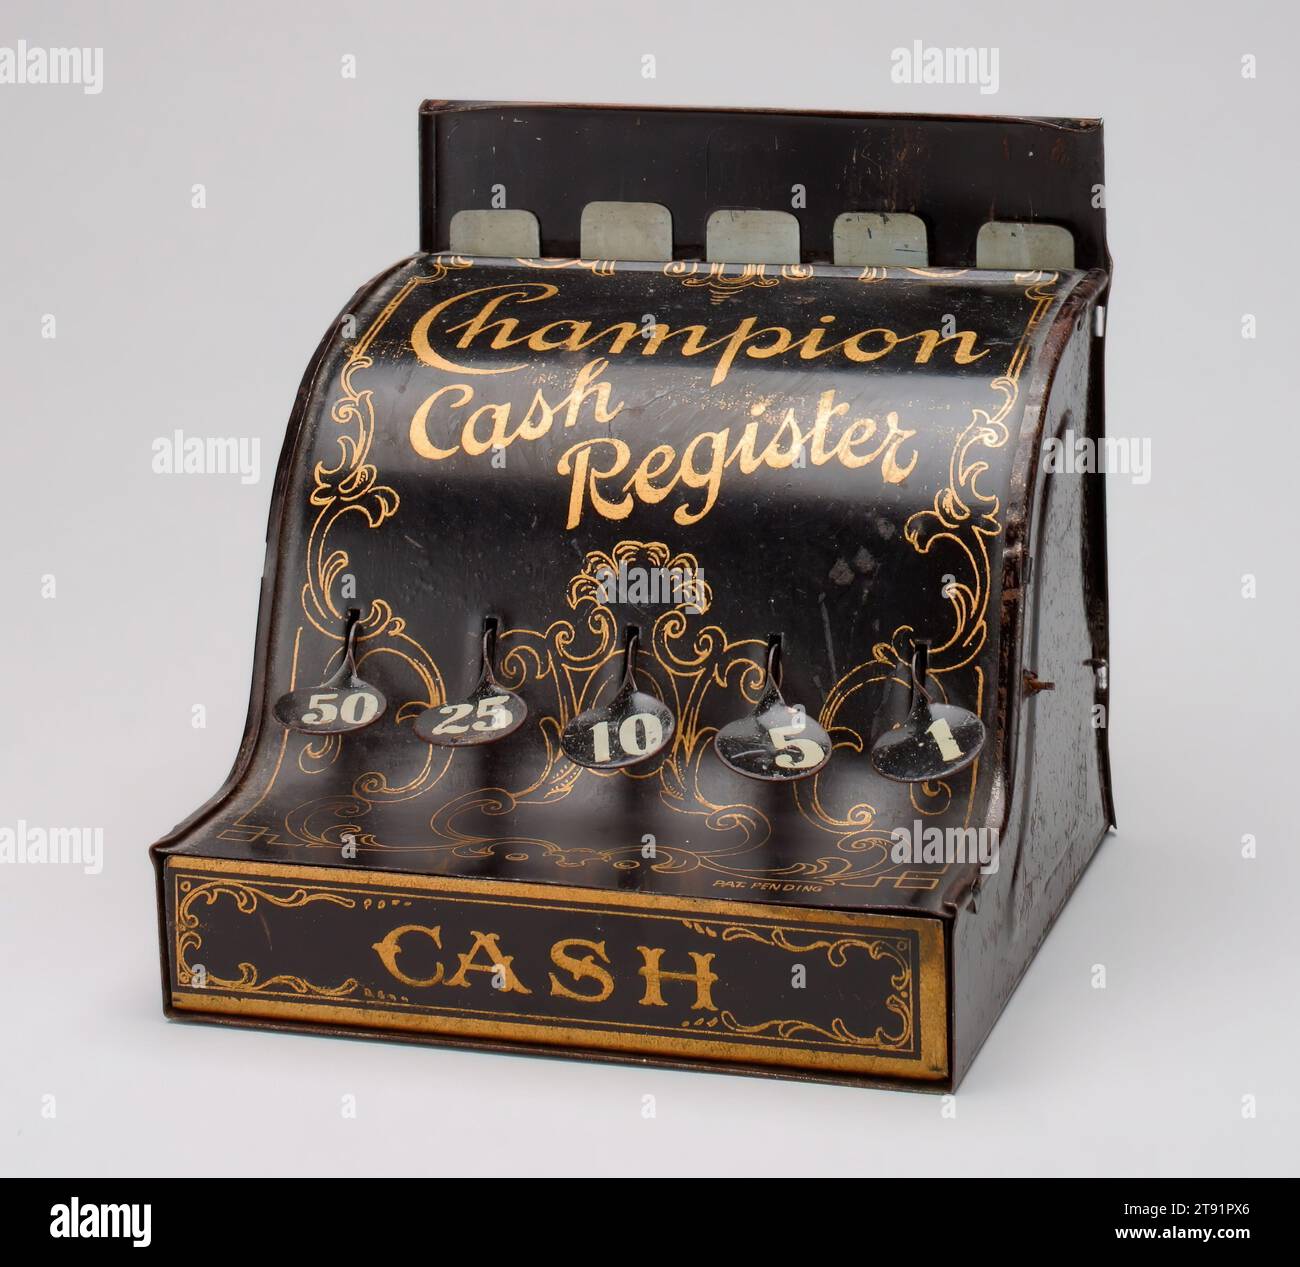 Champion Cash Register' still bank, early 20th century, 3 1/2 x 3 1/2 x 5 in. (8.89 x 8.89 x 12.7 cm), Tin, pigment, United States, 20th century Stock Photo